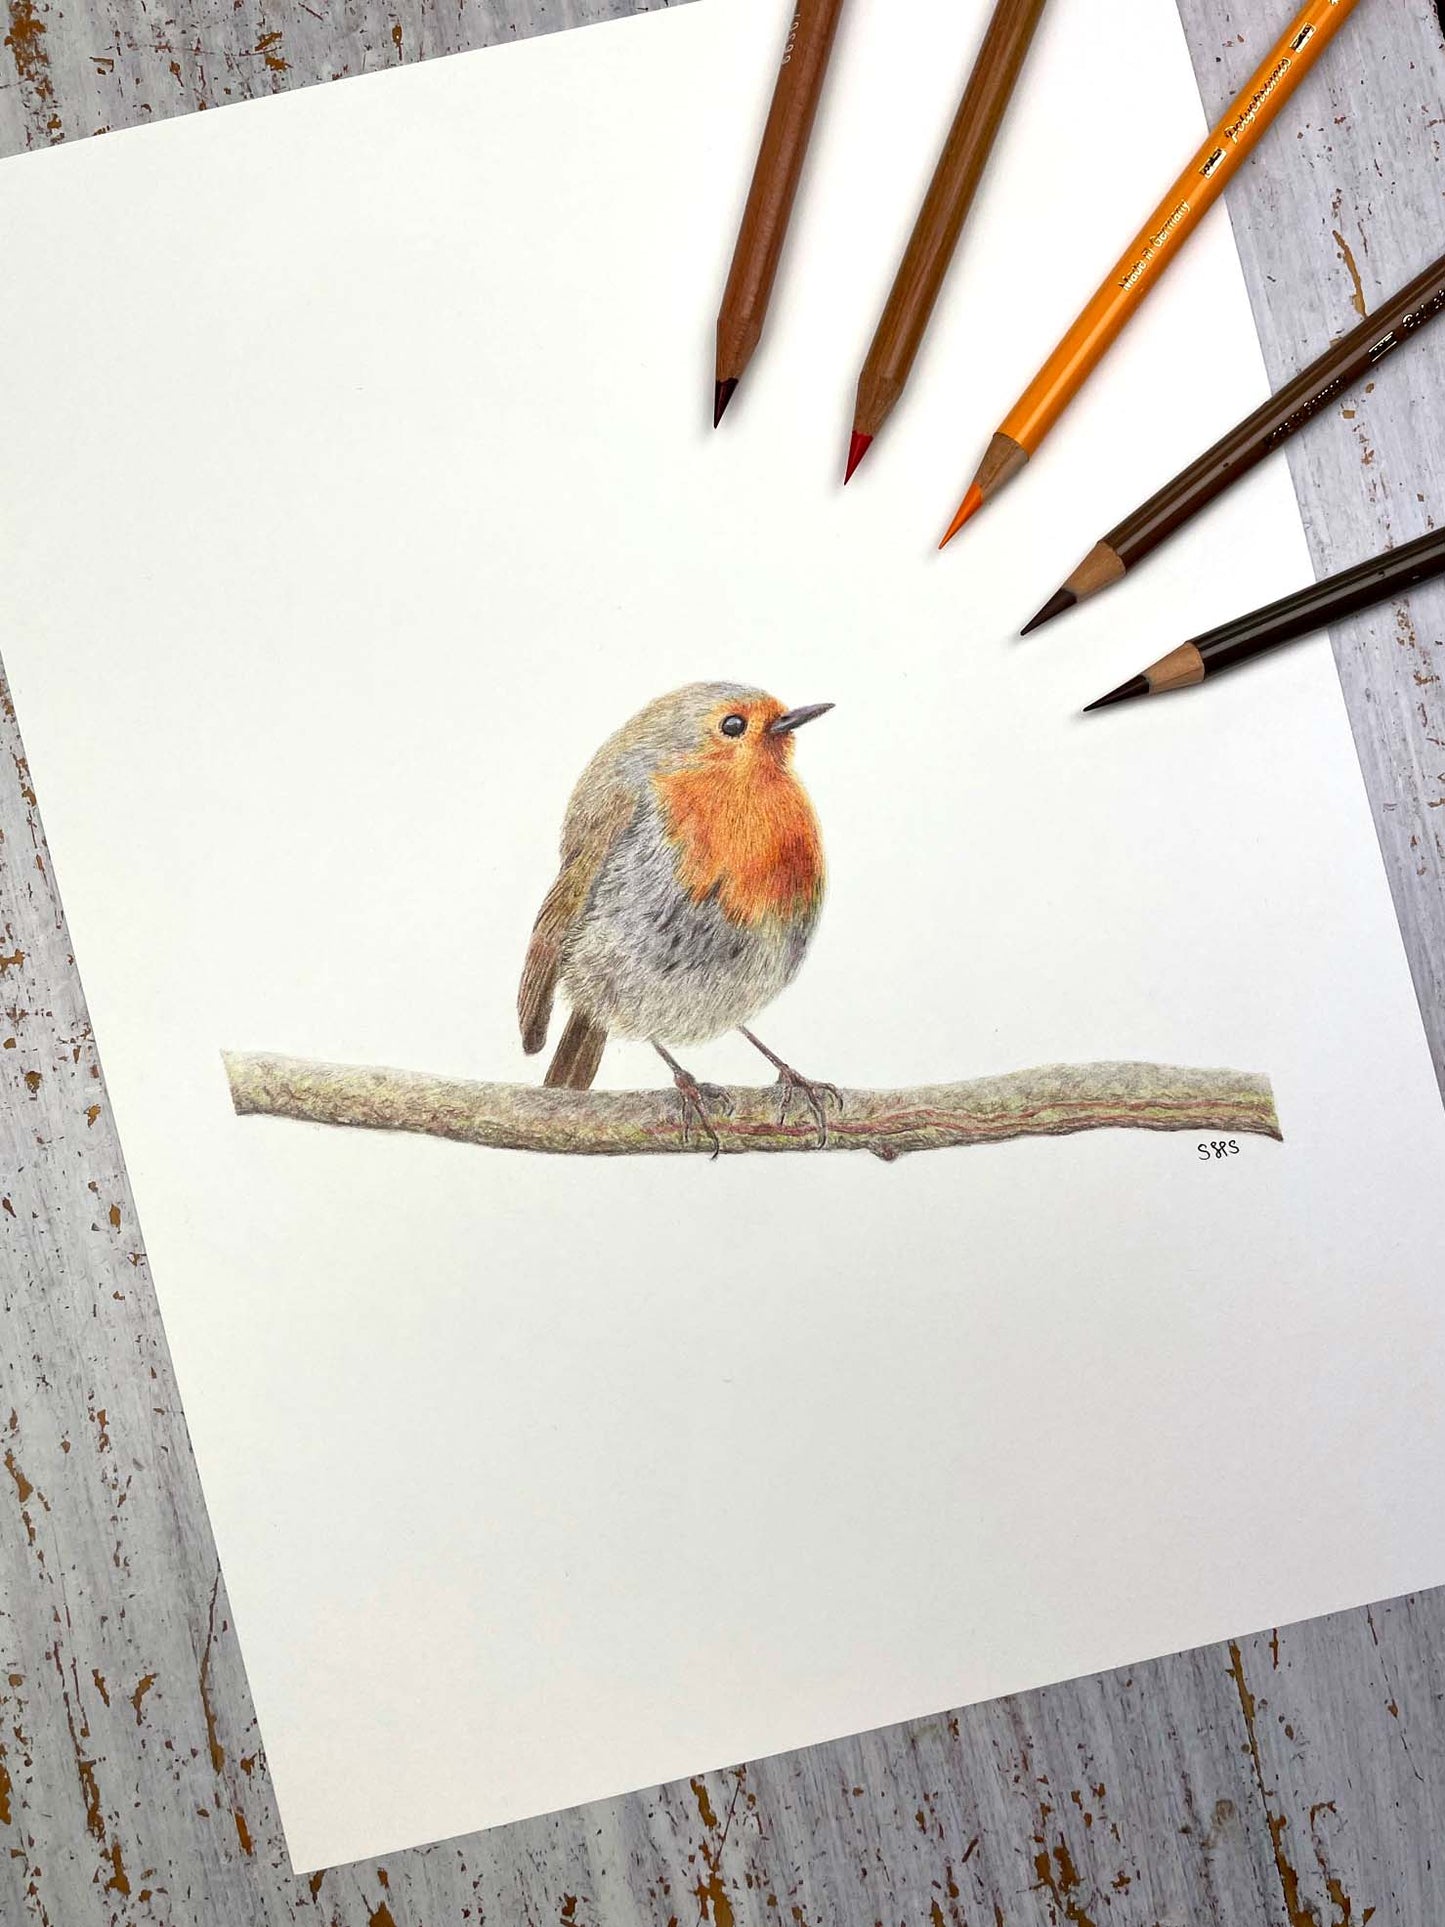 How To Draw A Robin, Step by Step, Drawing Guide, by Dawn - DragoArt